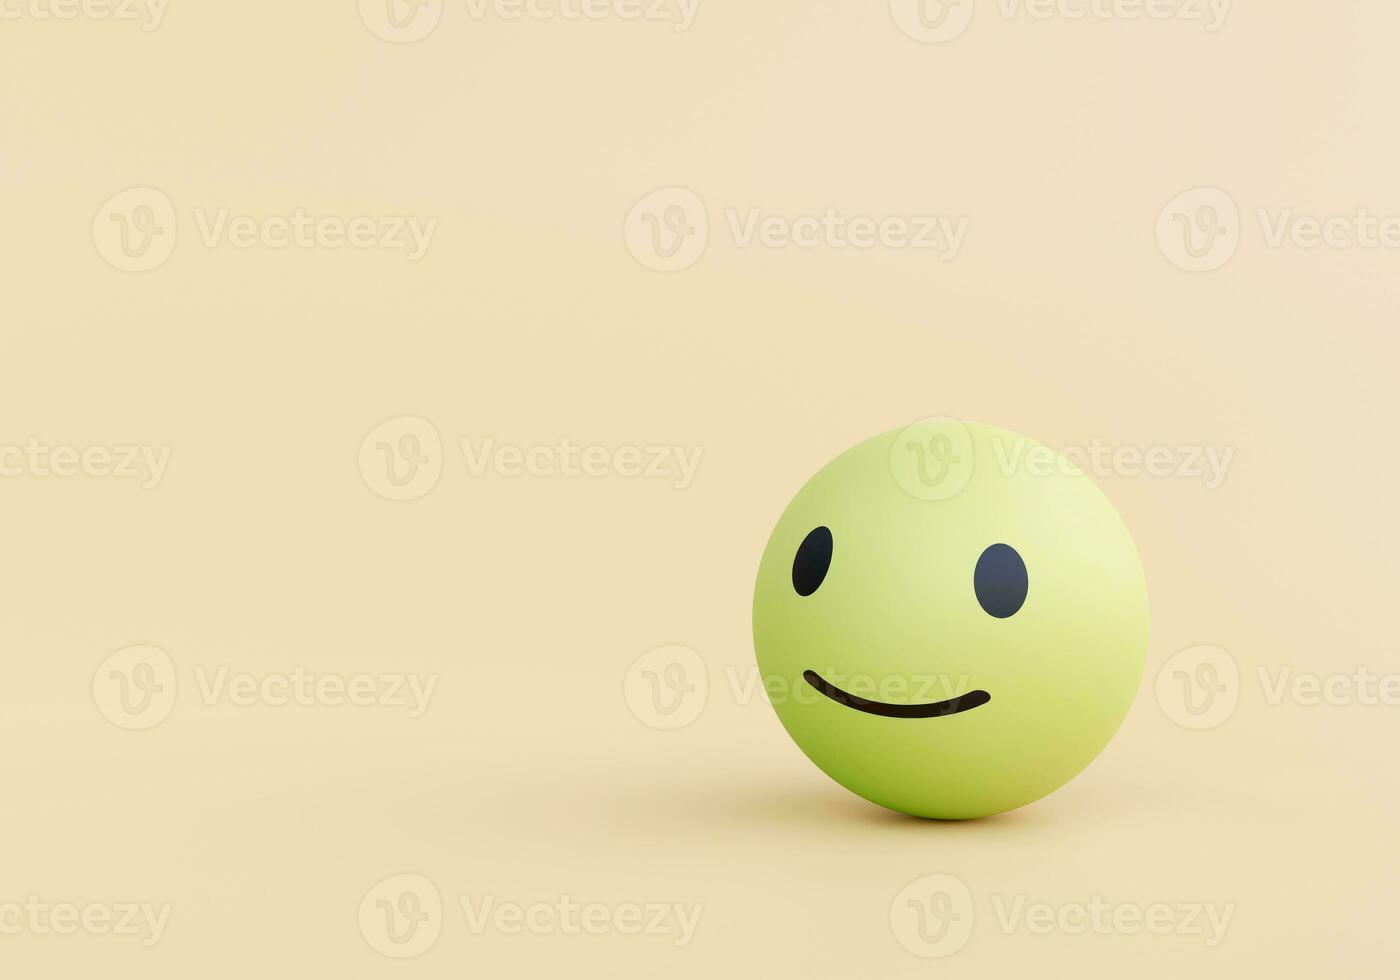 Ball with face icon showing good feelings on white background. concept of evaluation, feedback, customer satisfaction rating, and service, comments. photo